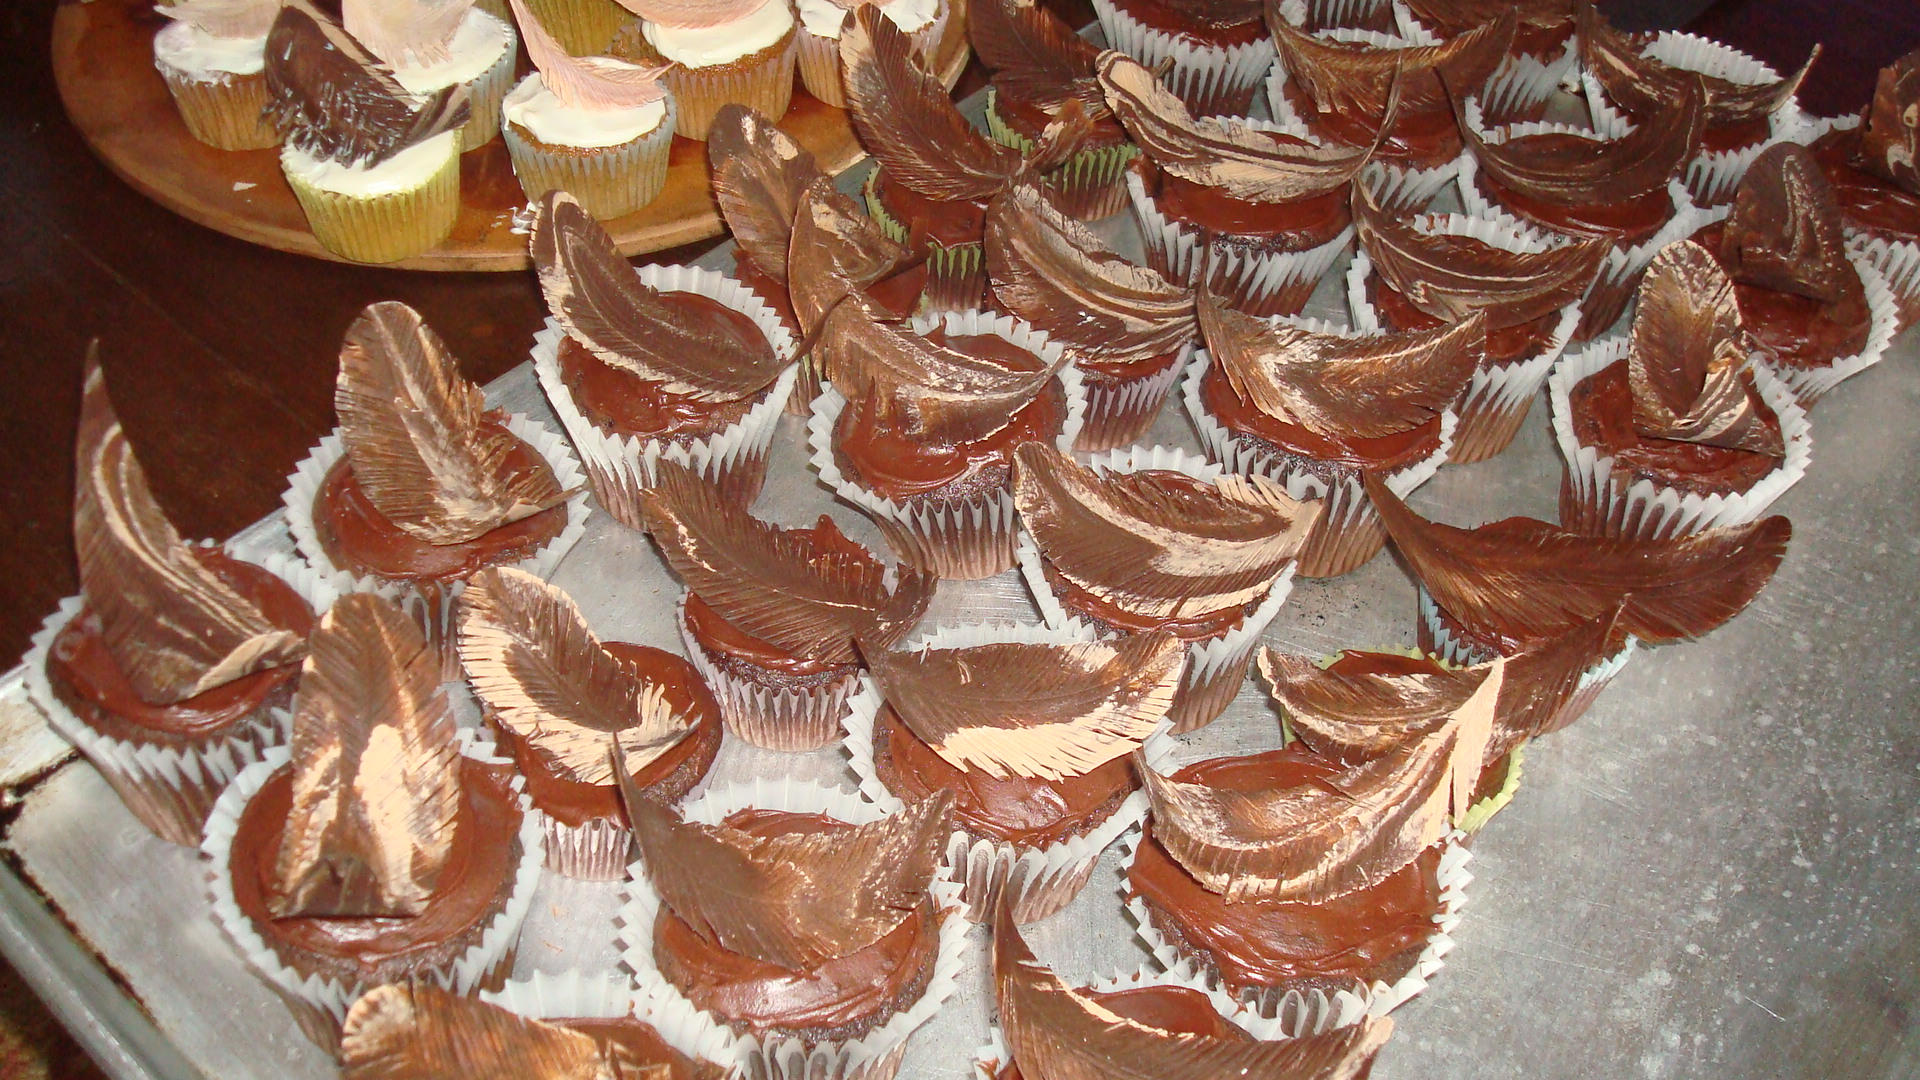 The yummy cupcakes with chocolate feathers on top. Kyle made these the morning of the wedding!